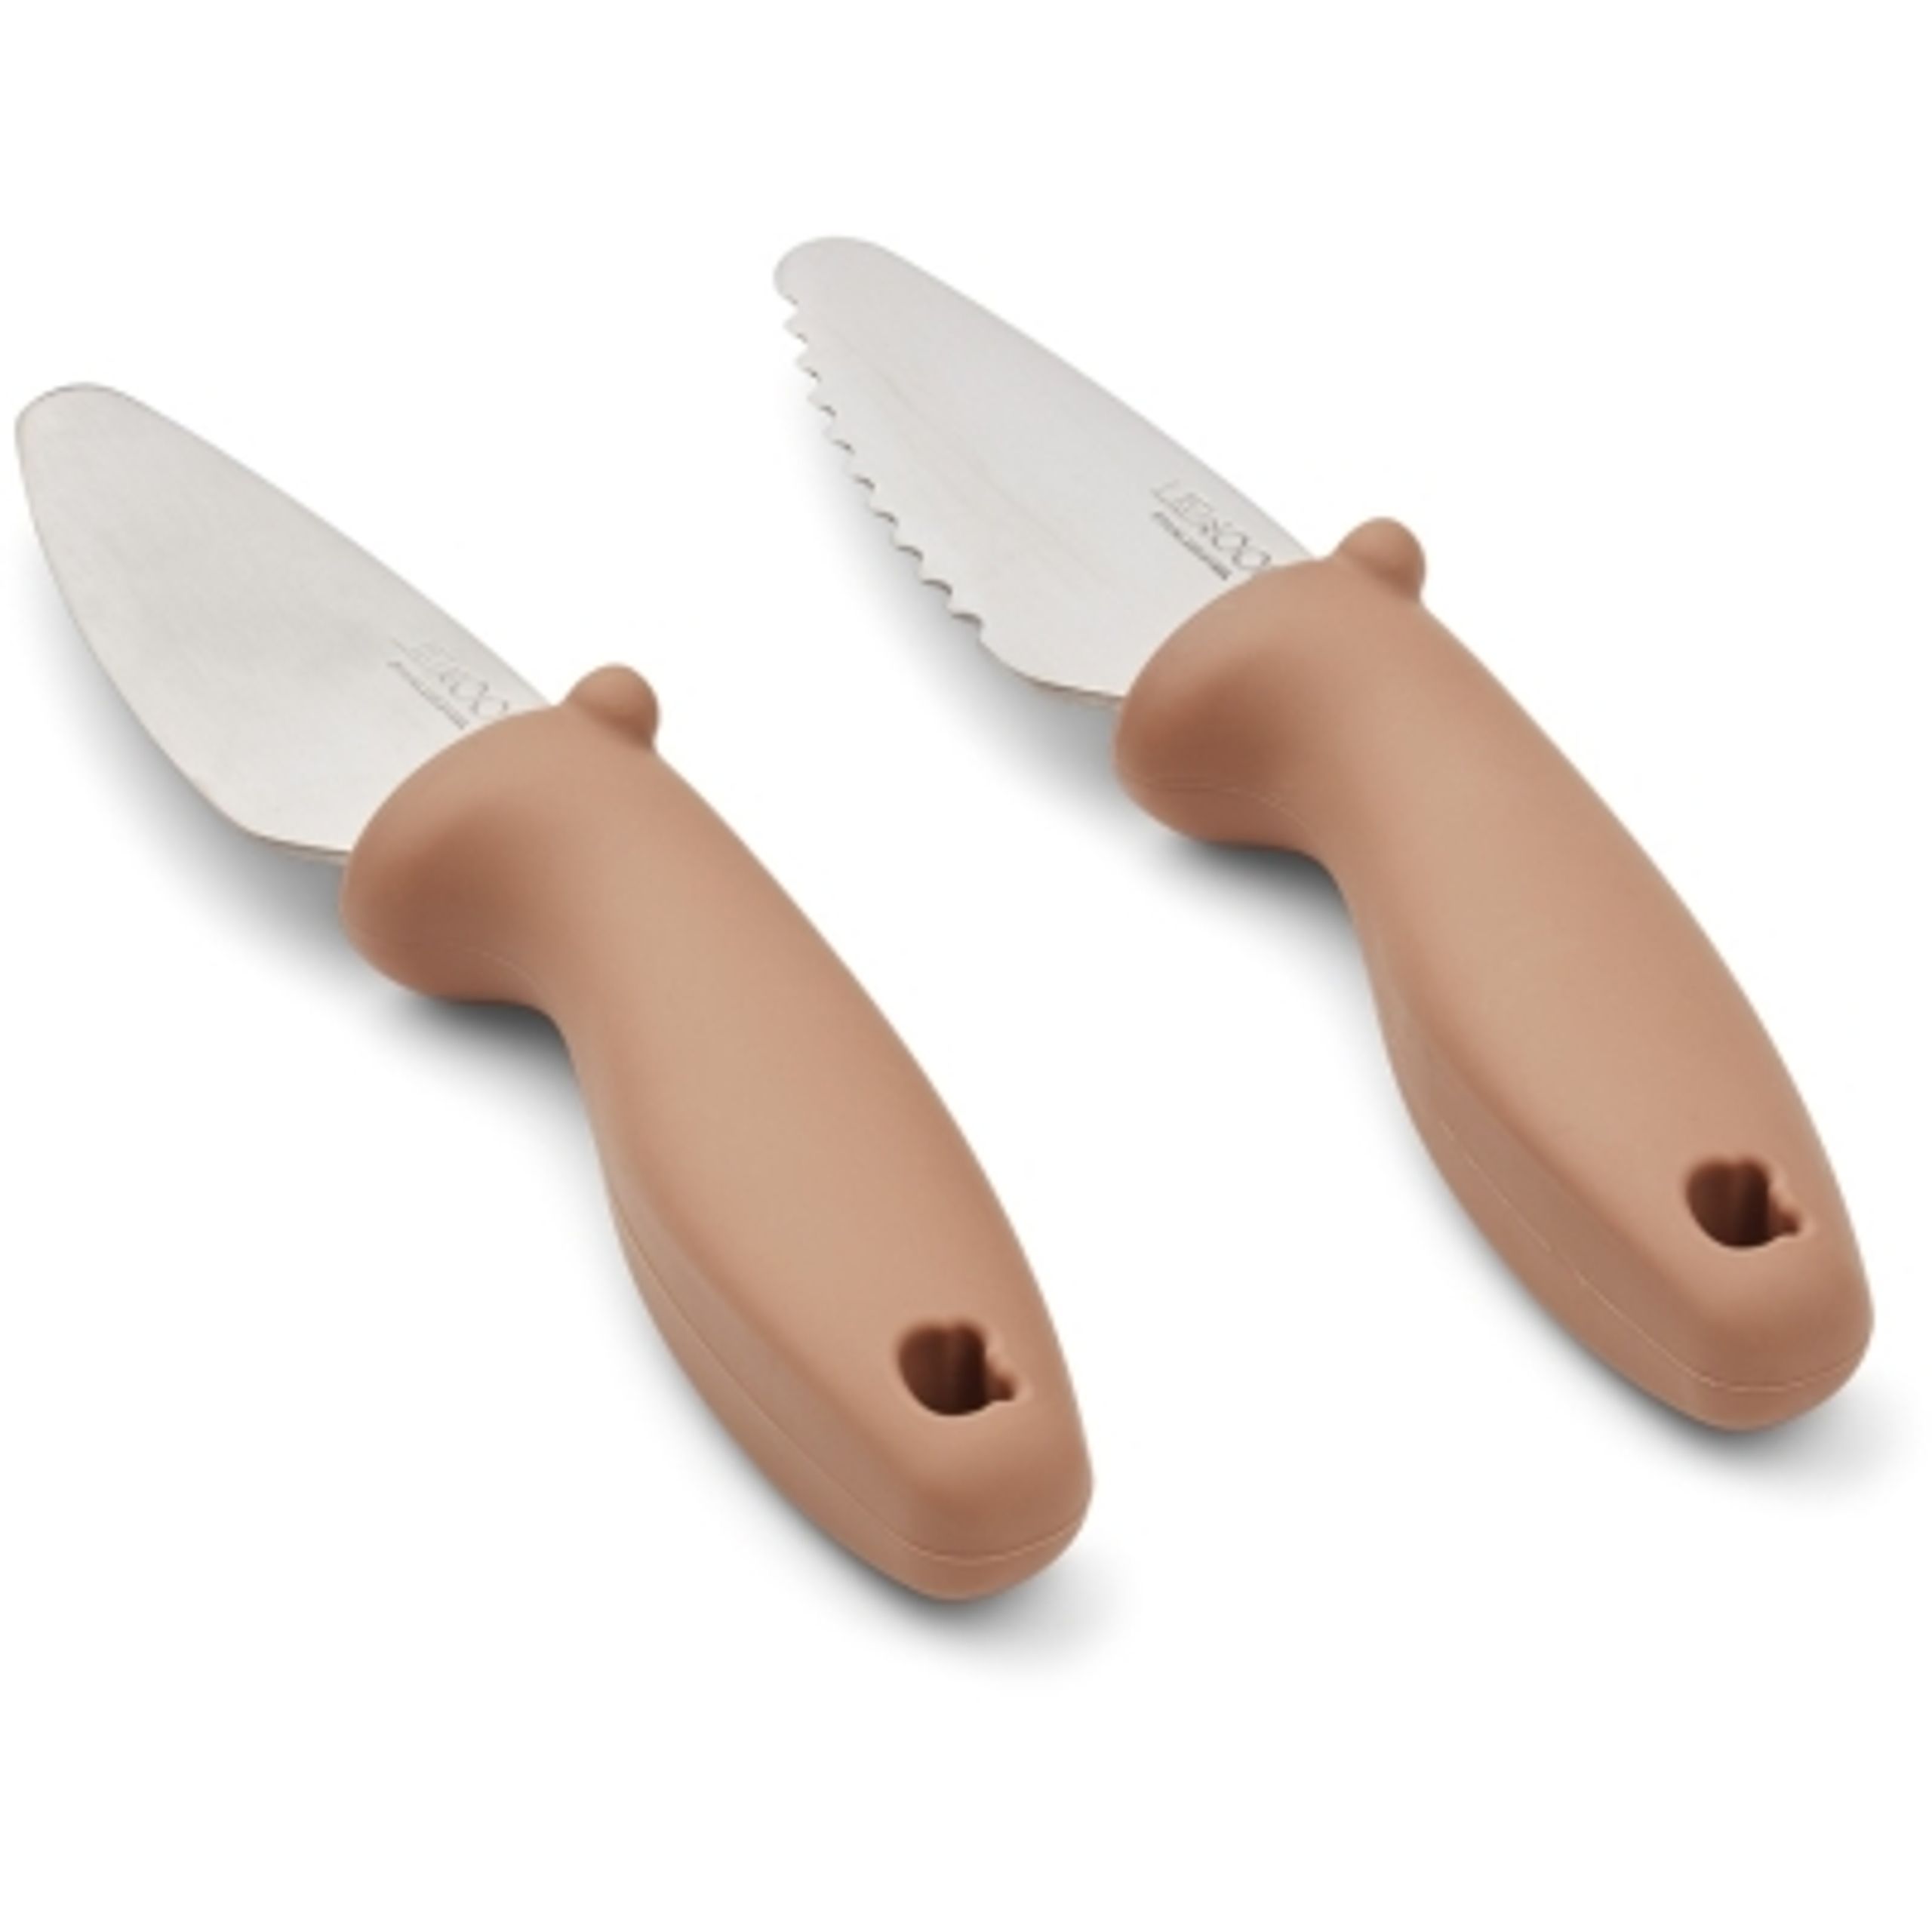 LIEWOOD - Messer - Perry Cutting Knife Set - 2074 Tuscany Rose